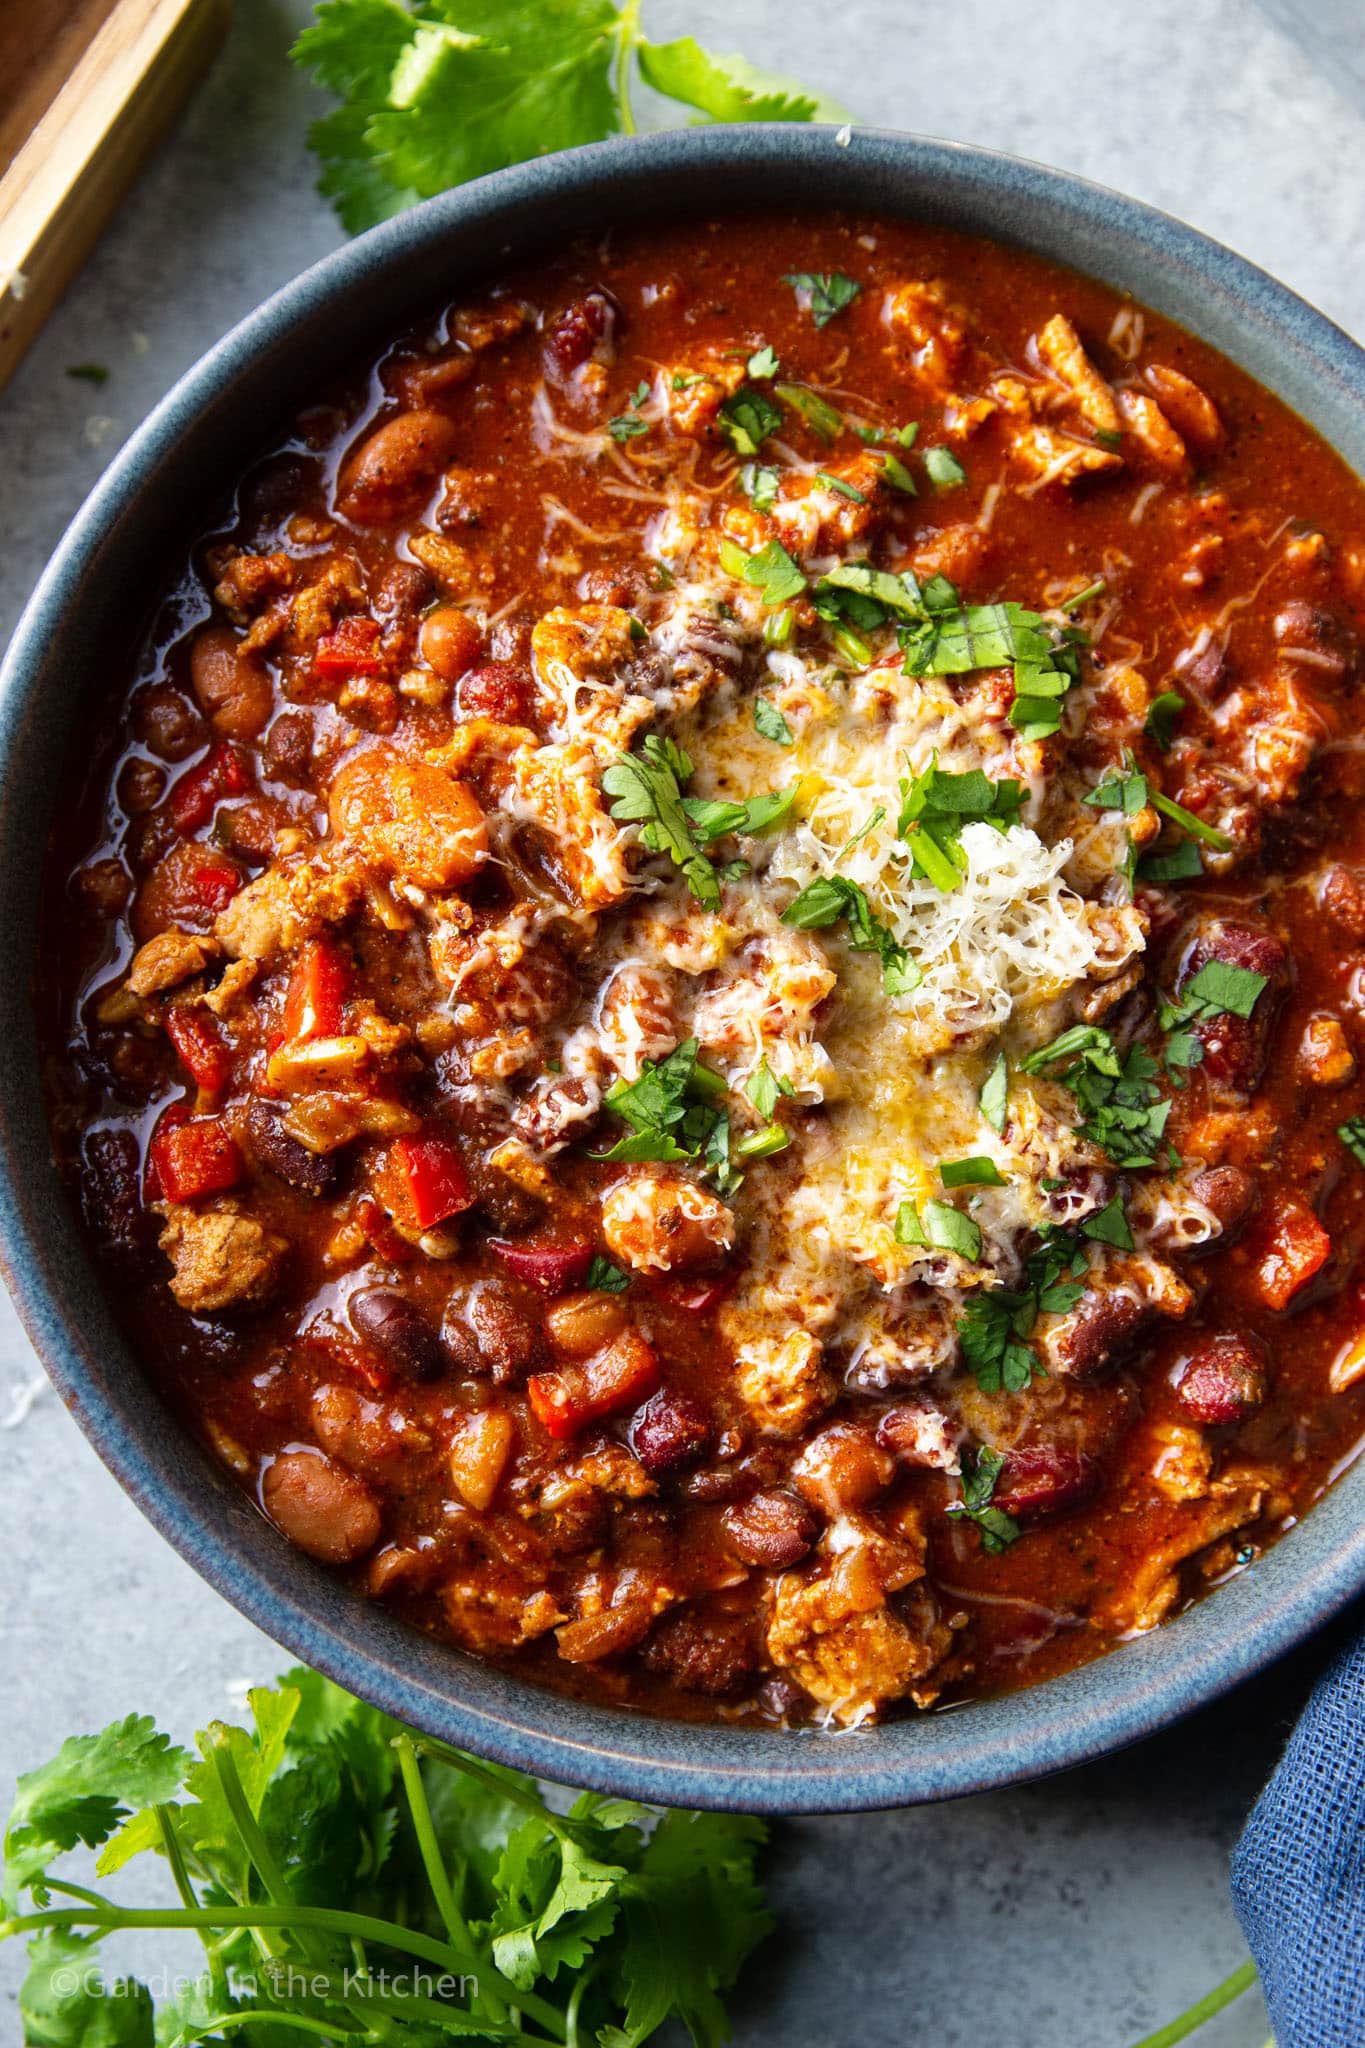 A big bowl of turkey chili with green herbs and cheese.